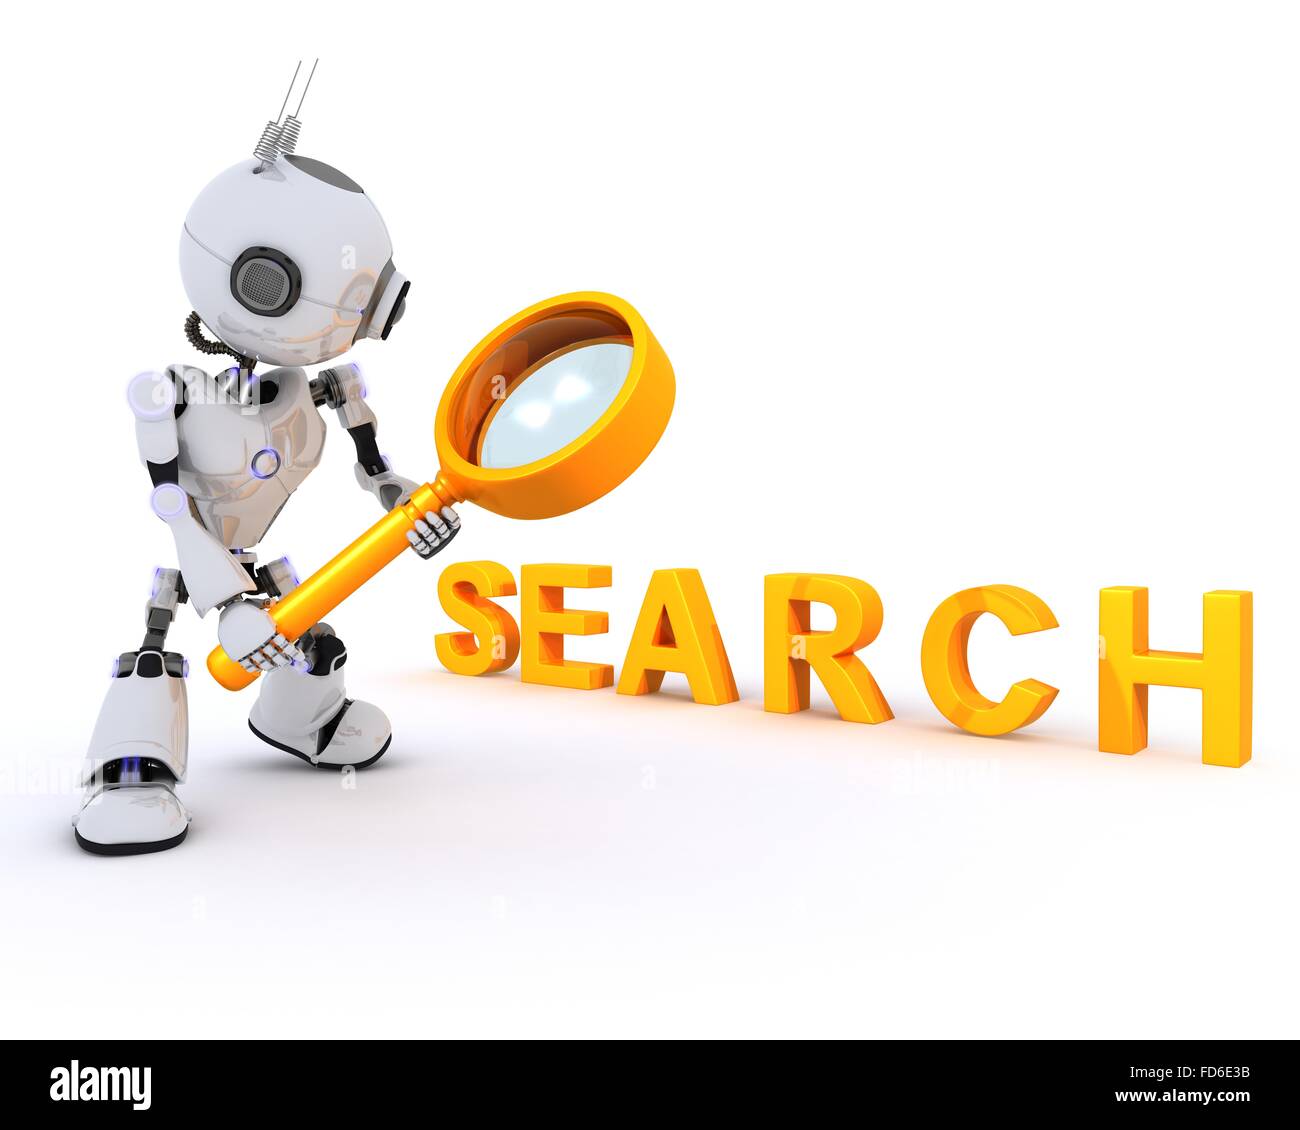 3D Render of a Robot searching with magnifying glass Stock Photo - Alamy